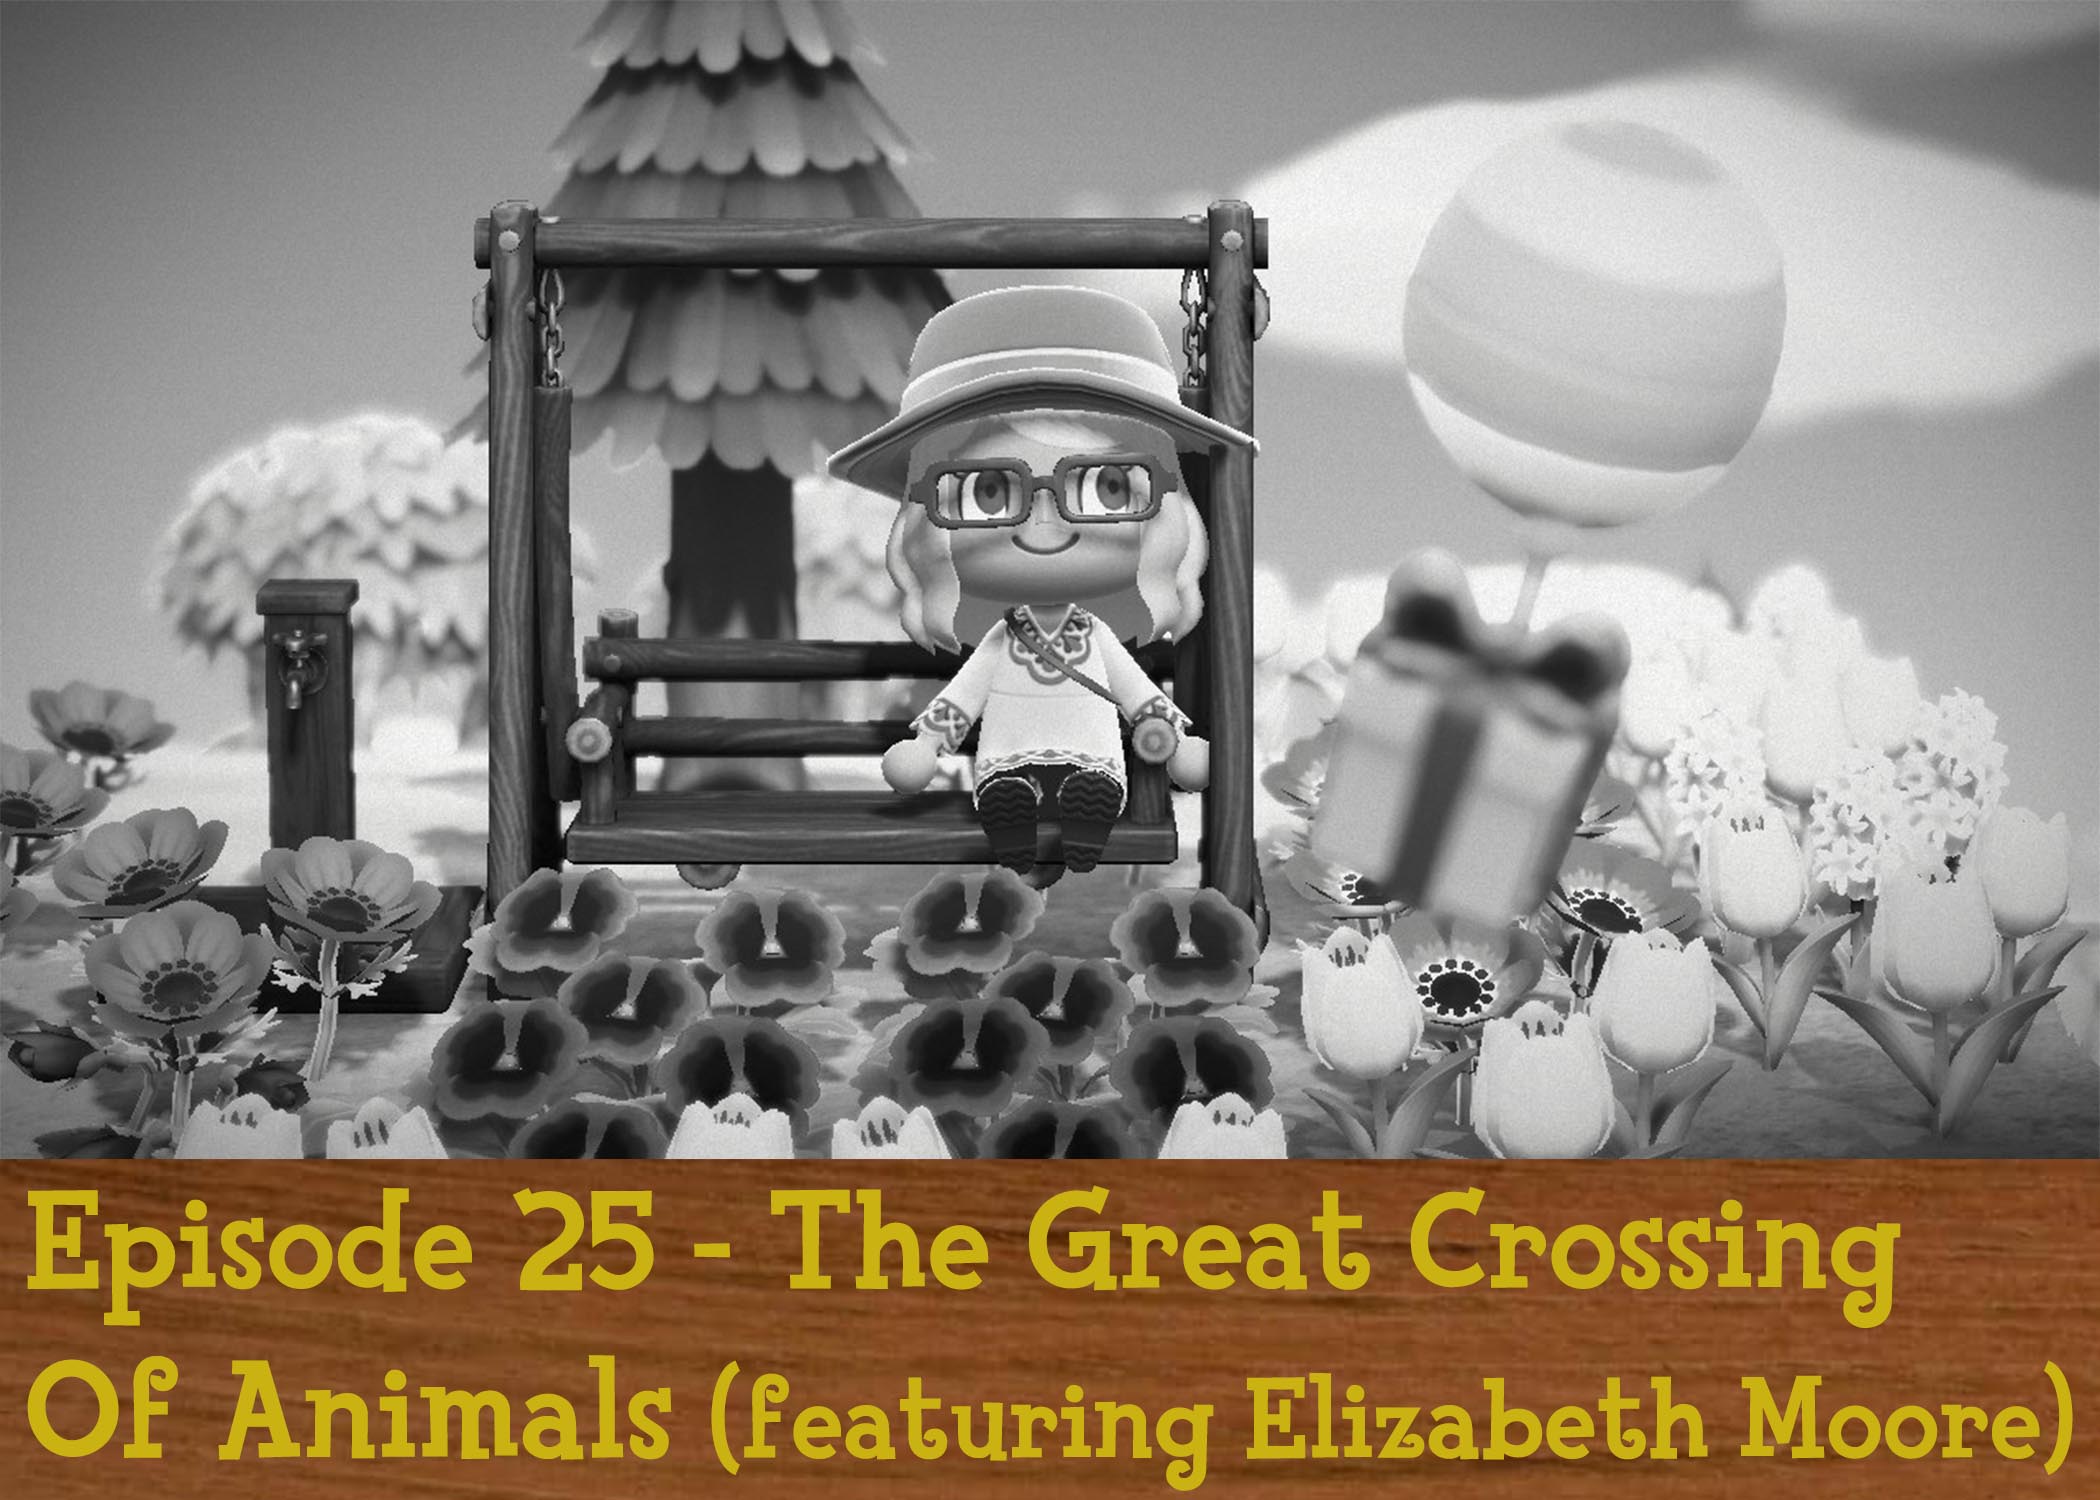 Episode 25 - The Great Crossing Of Animals